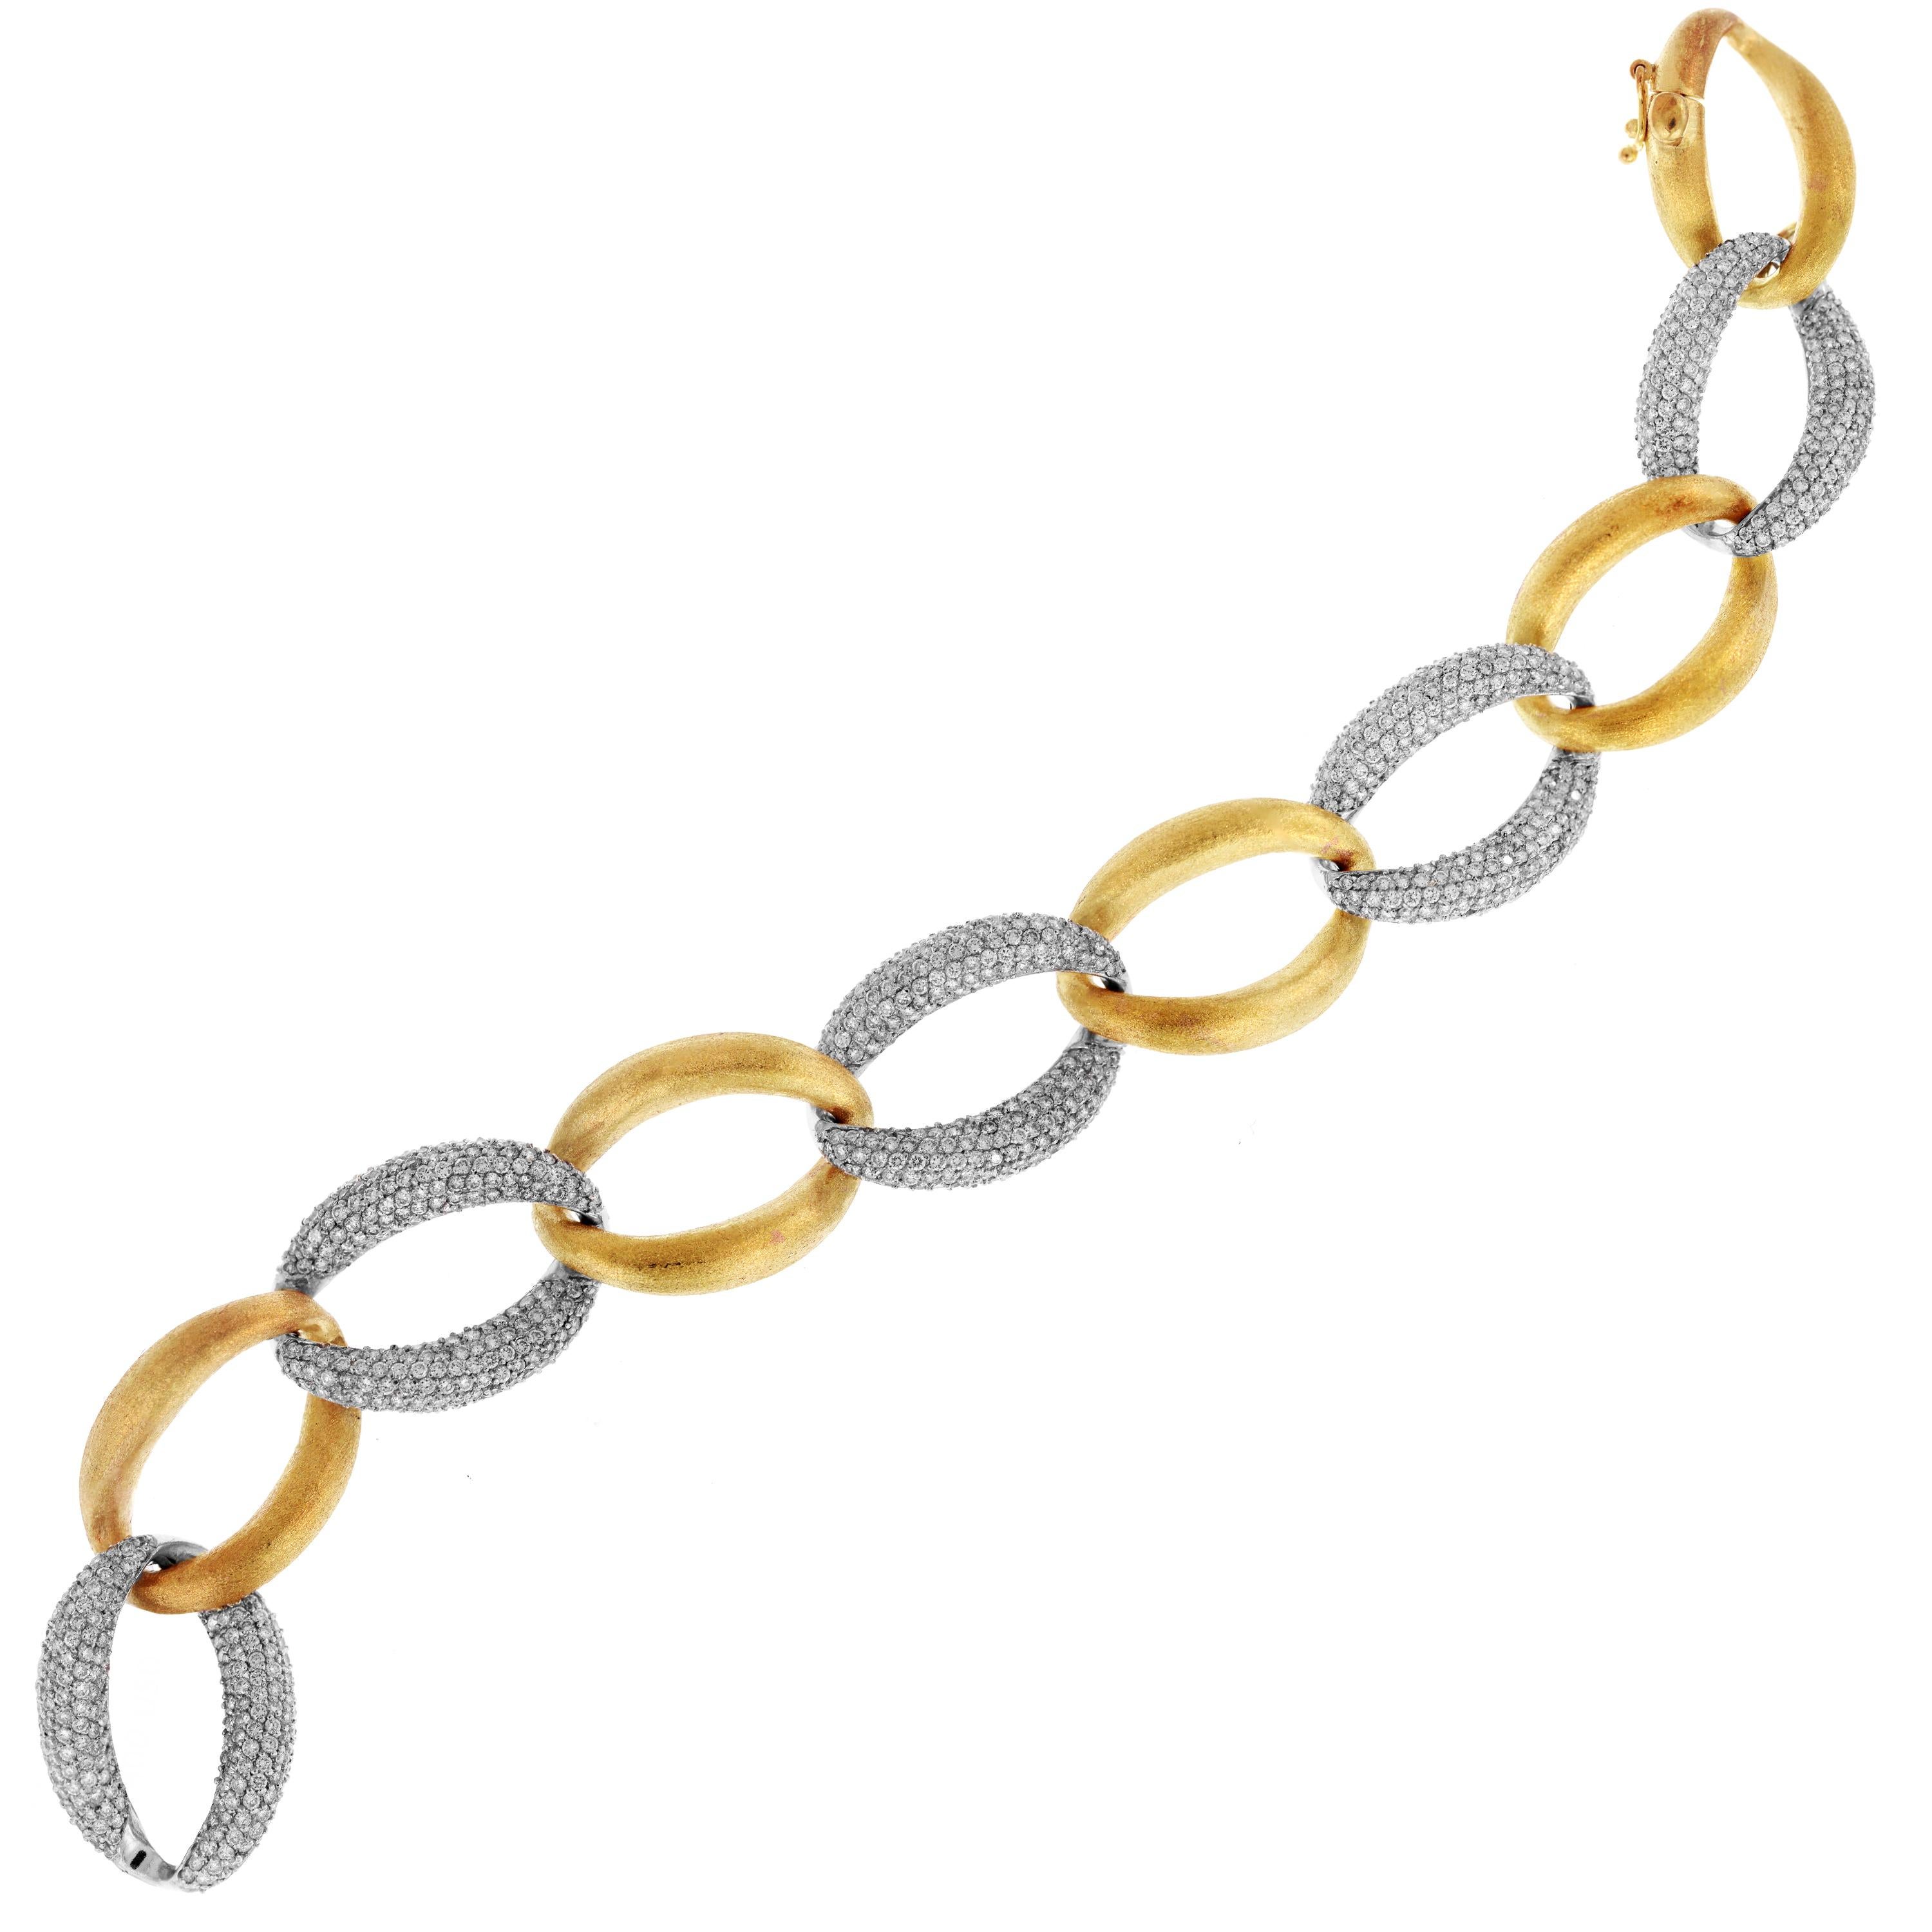 18K Yellow White Two Tone Gold Diamond Oval Links Bracelet

Stunning bracelet with brushed, matte finished yellow gold. White gold links are pavé set with diamonds all throughout

6.42 carat G color, VS clarity diamonds

Bracelet is 8 inches in